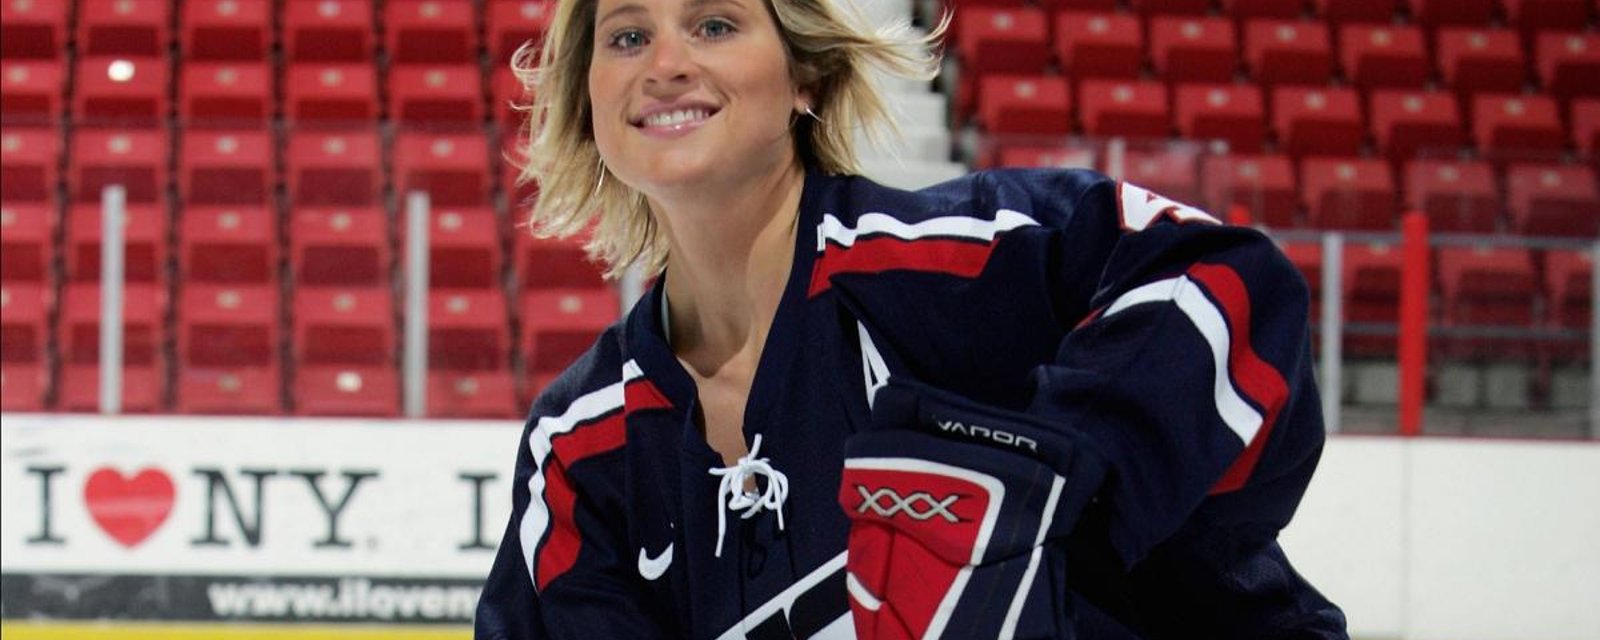 Former Olympic Gold Medalist making waves as potential candidate to be the NHL's first female GM.